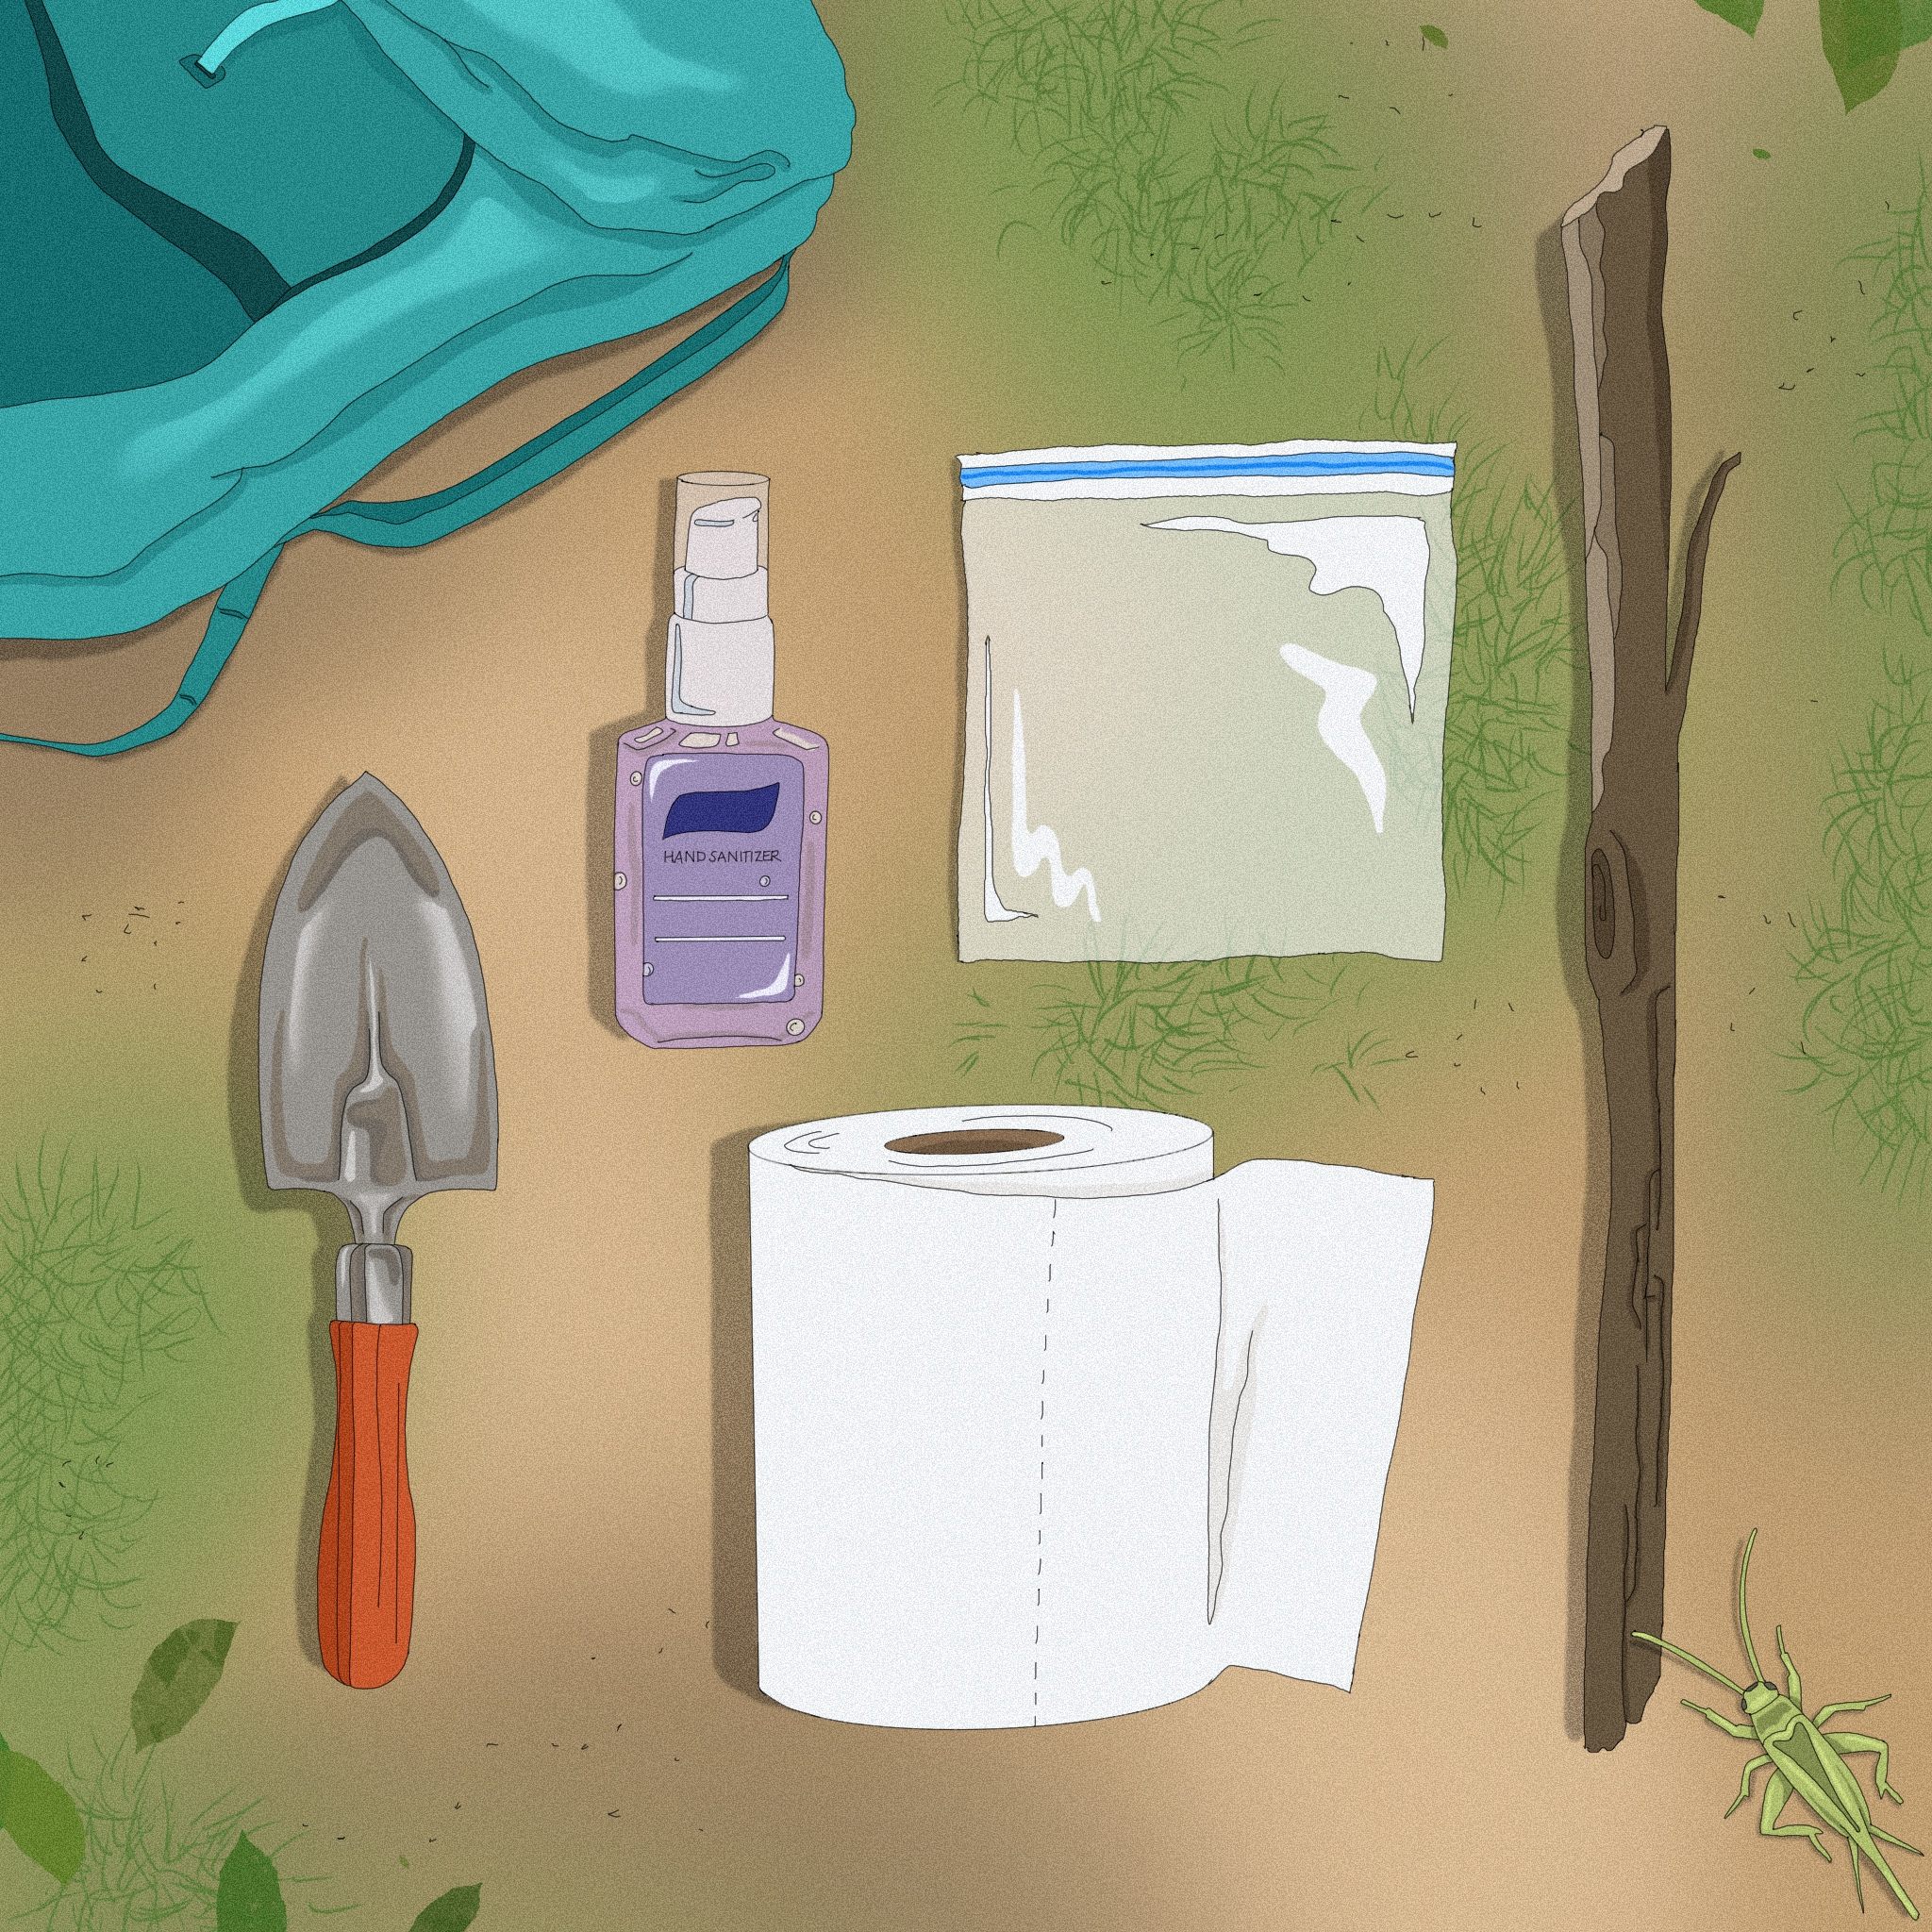 Have a plan and pack a kit to make taking care of business in the wilderness both easy and sustainable.